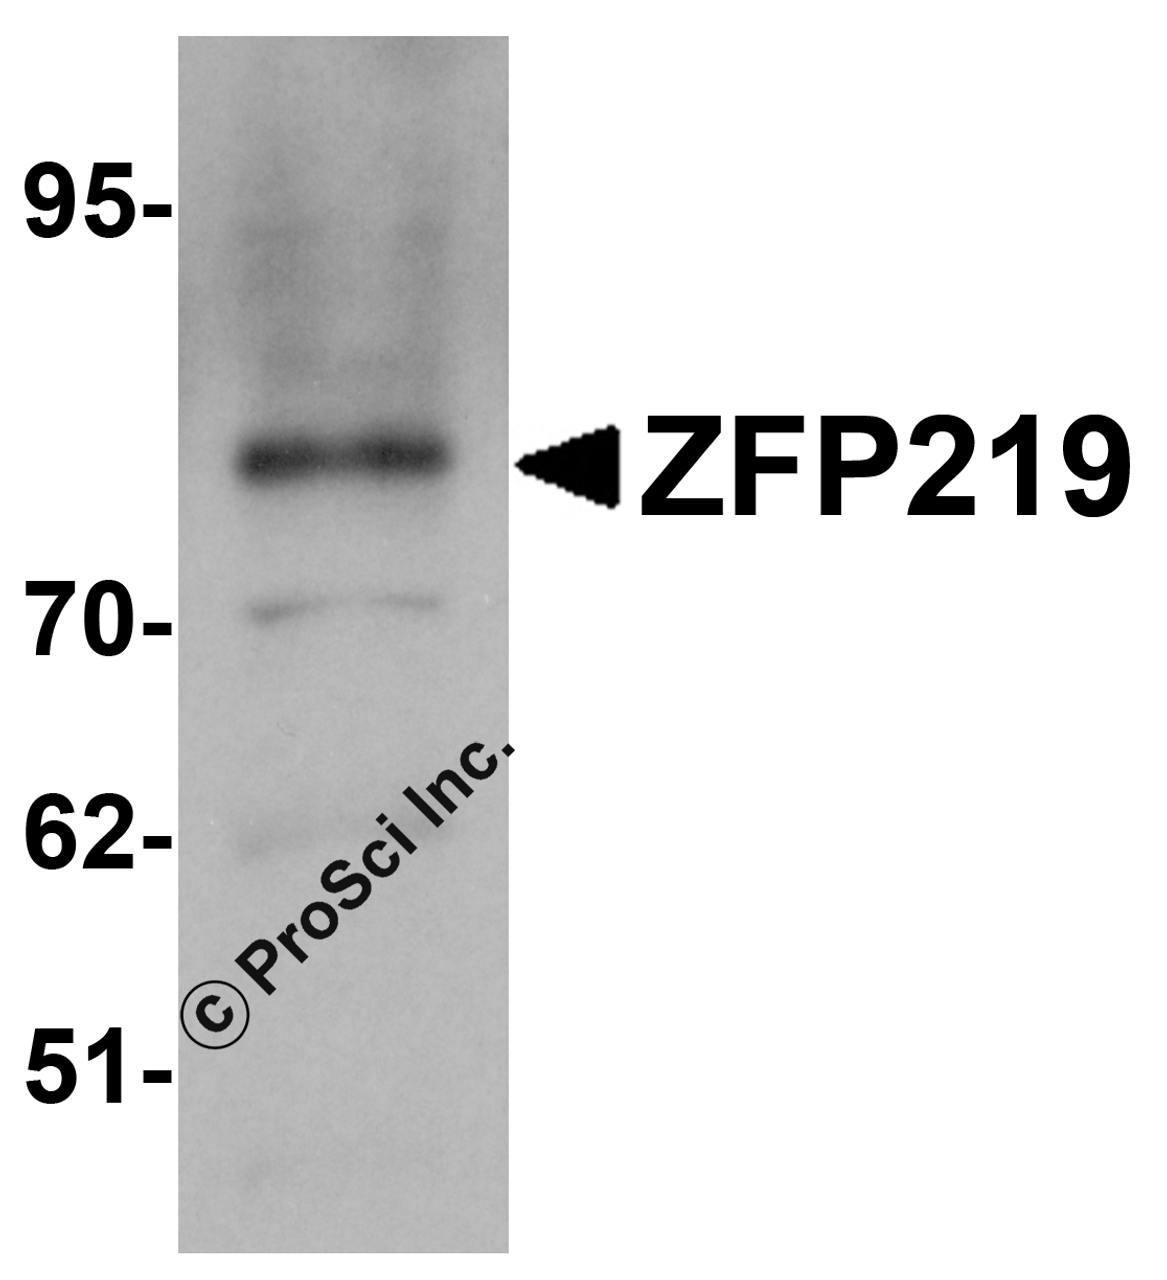 Western blot analysis of ZFP219 in EL4 cell lysate with ZFP219 antibody at 1 &#956;g/mL.